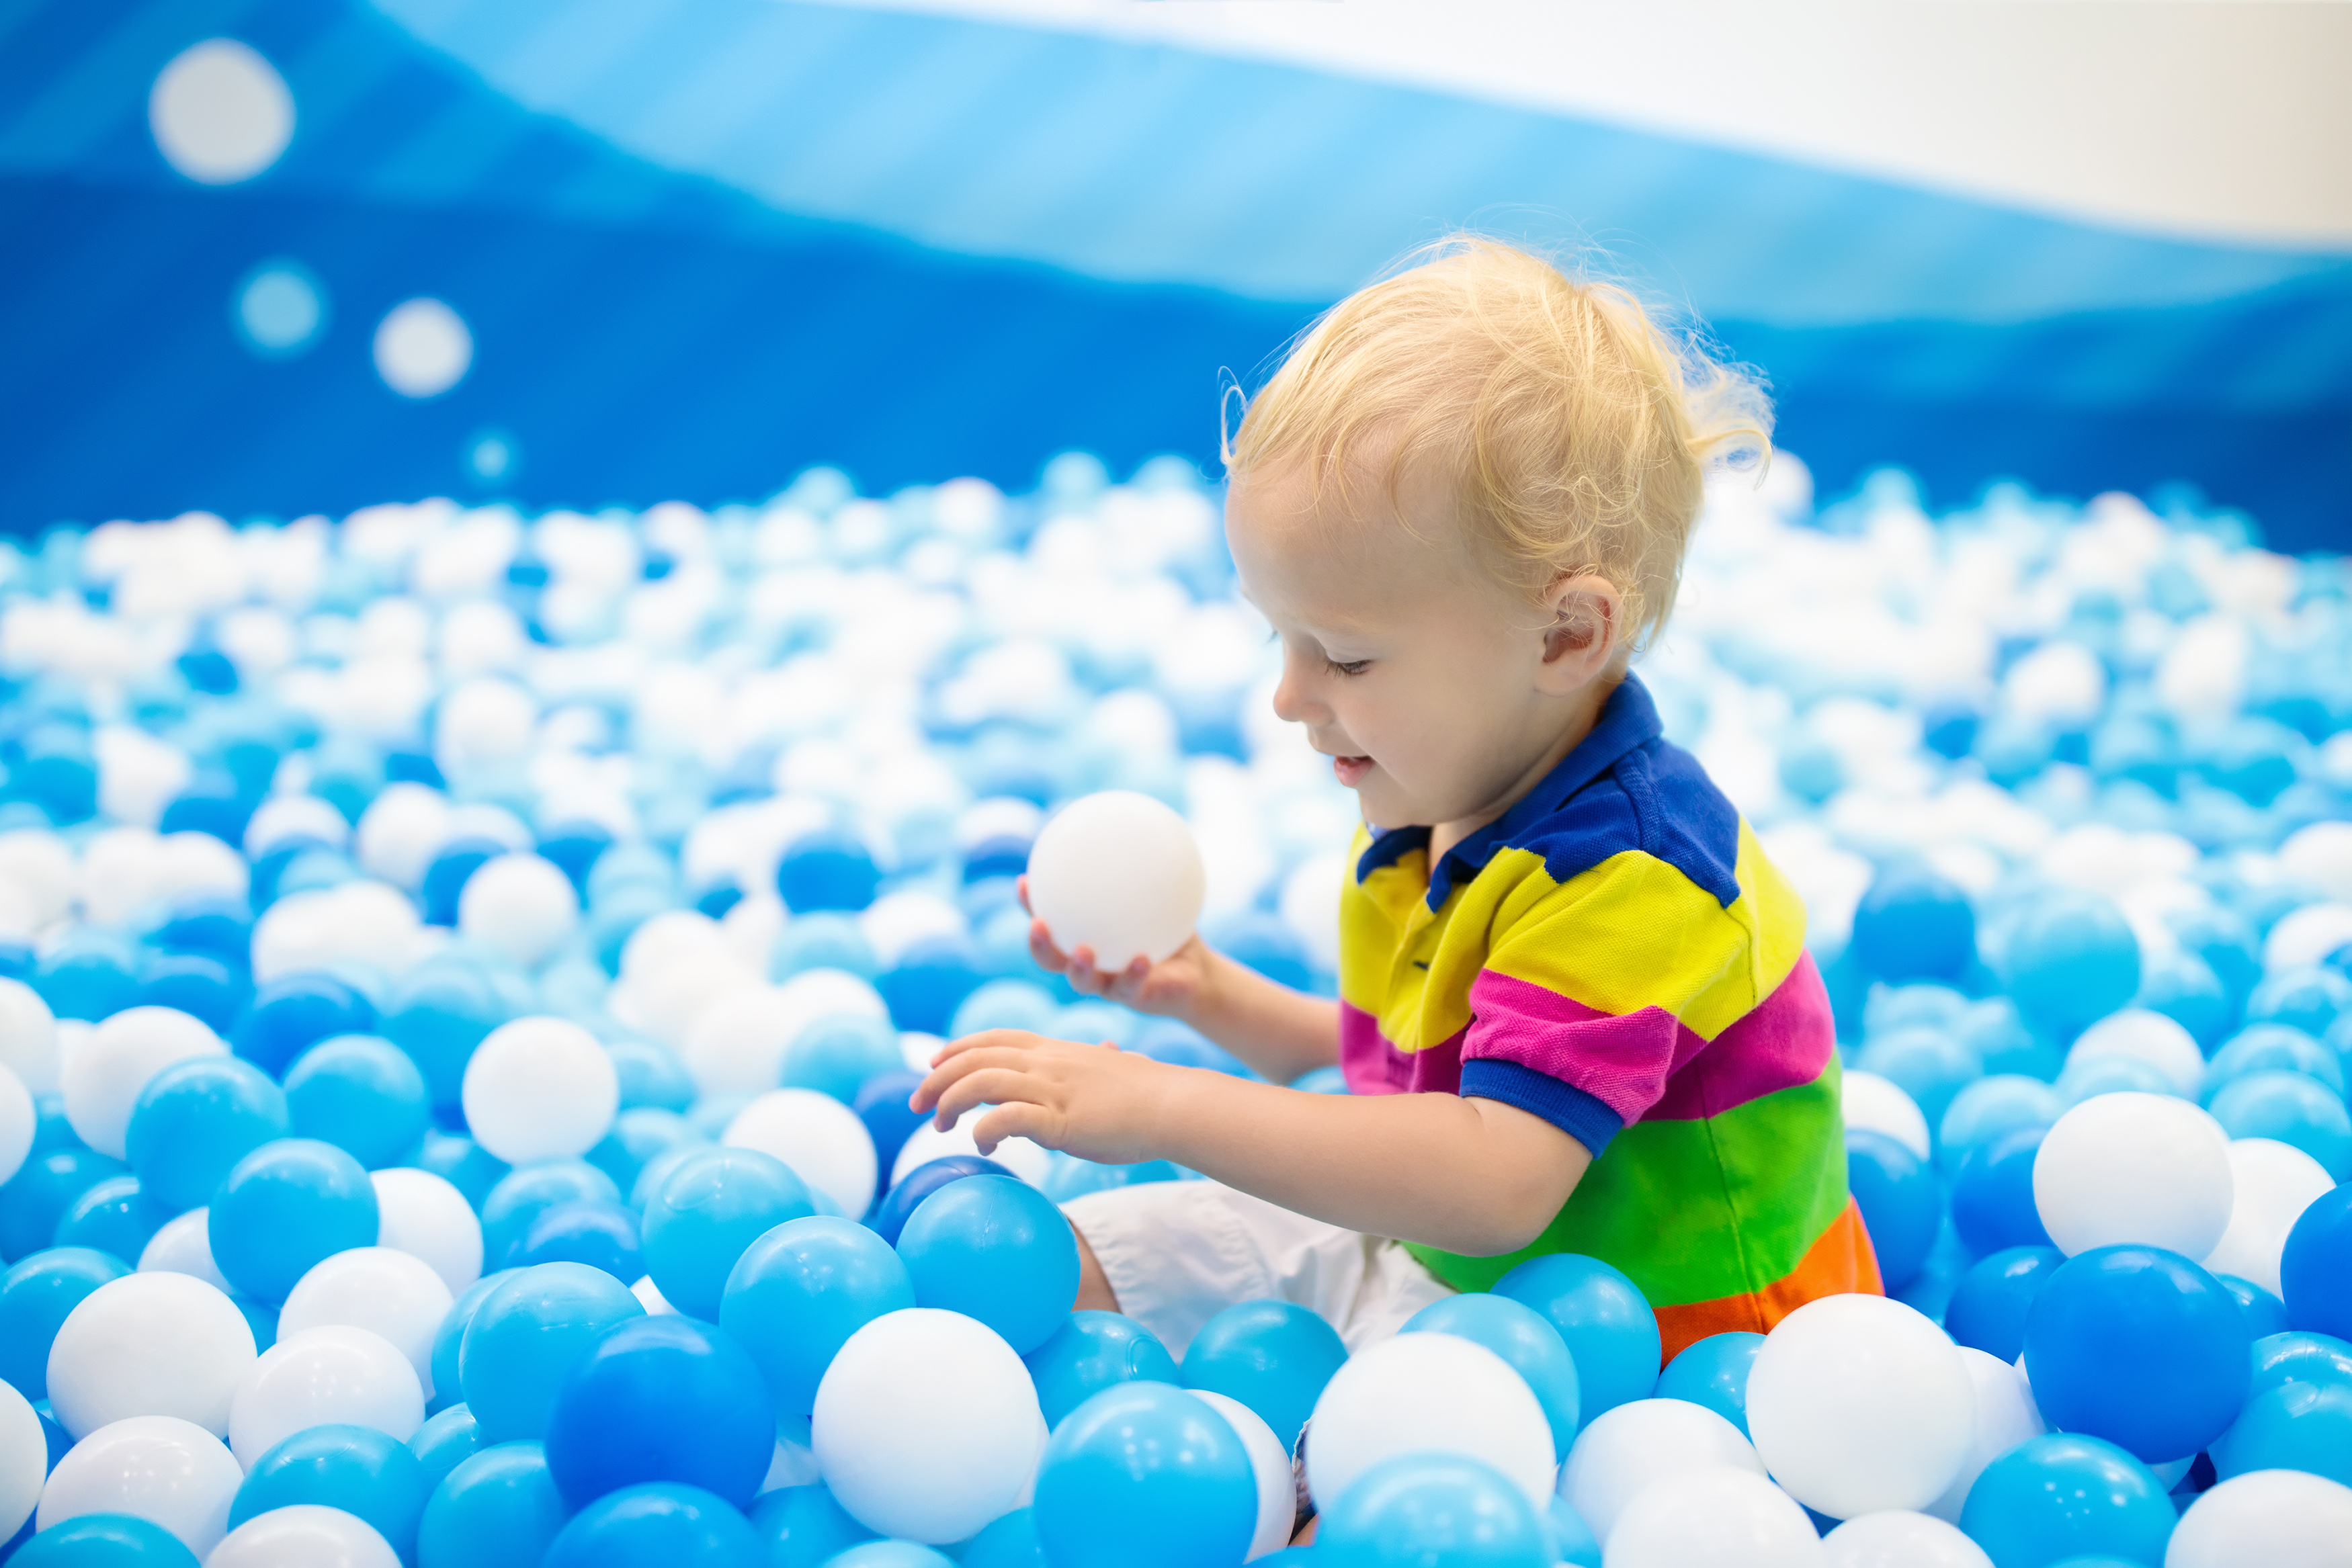 little boy playing in blue ball pit